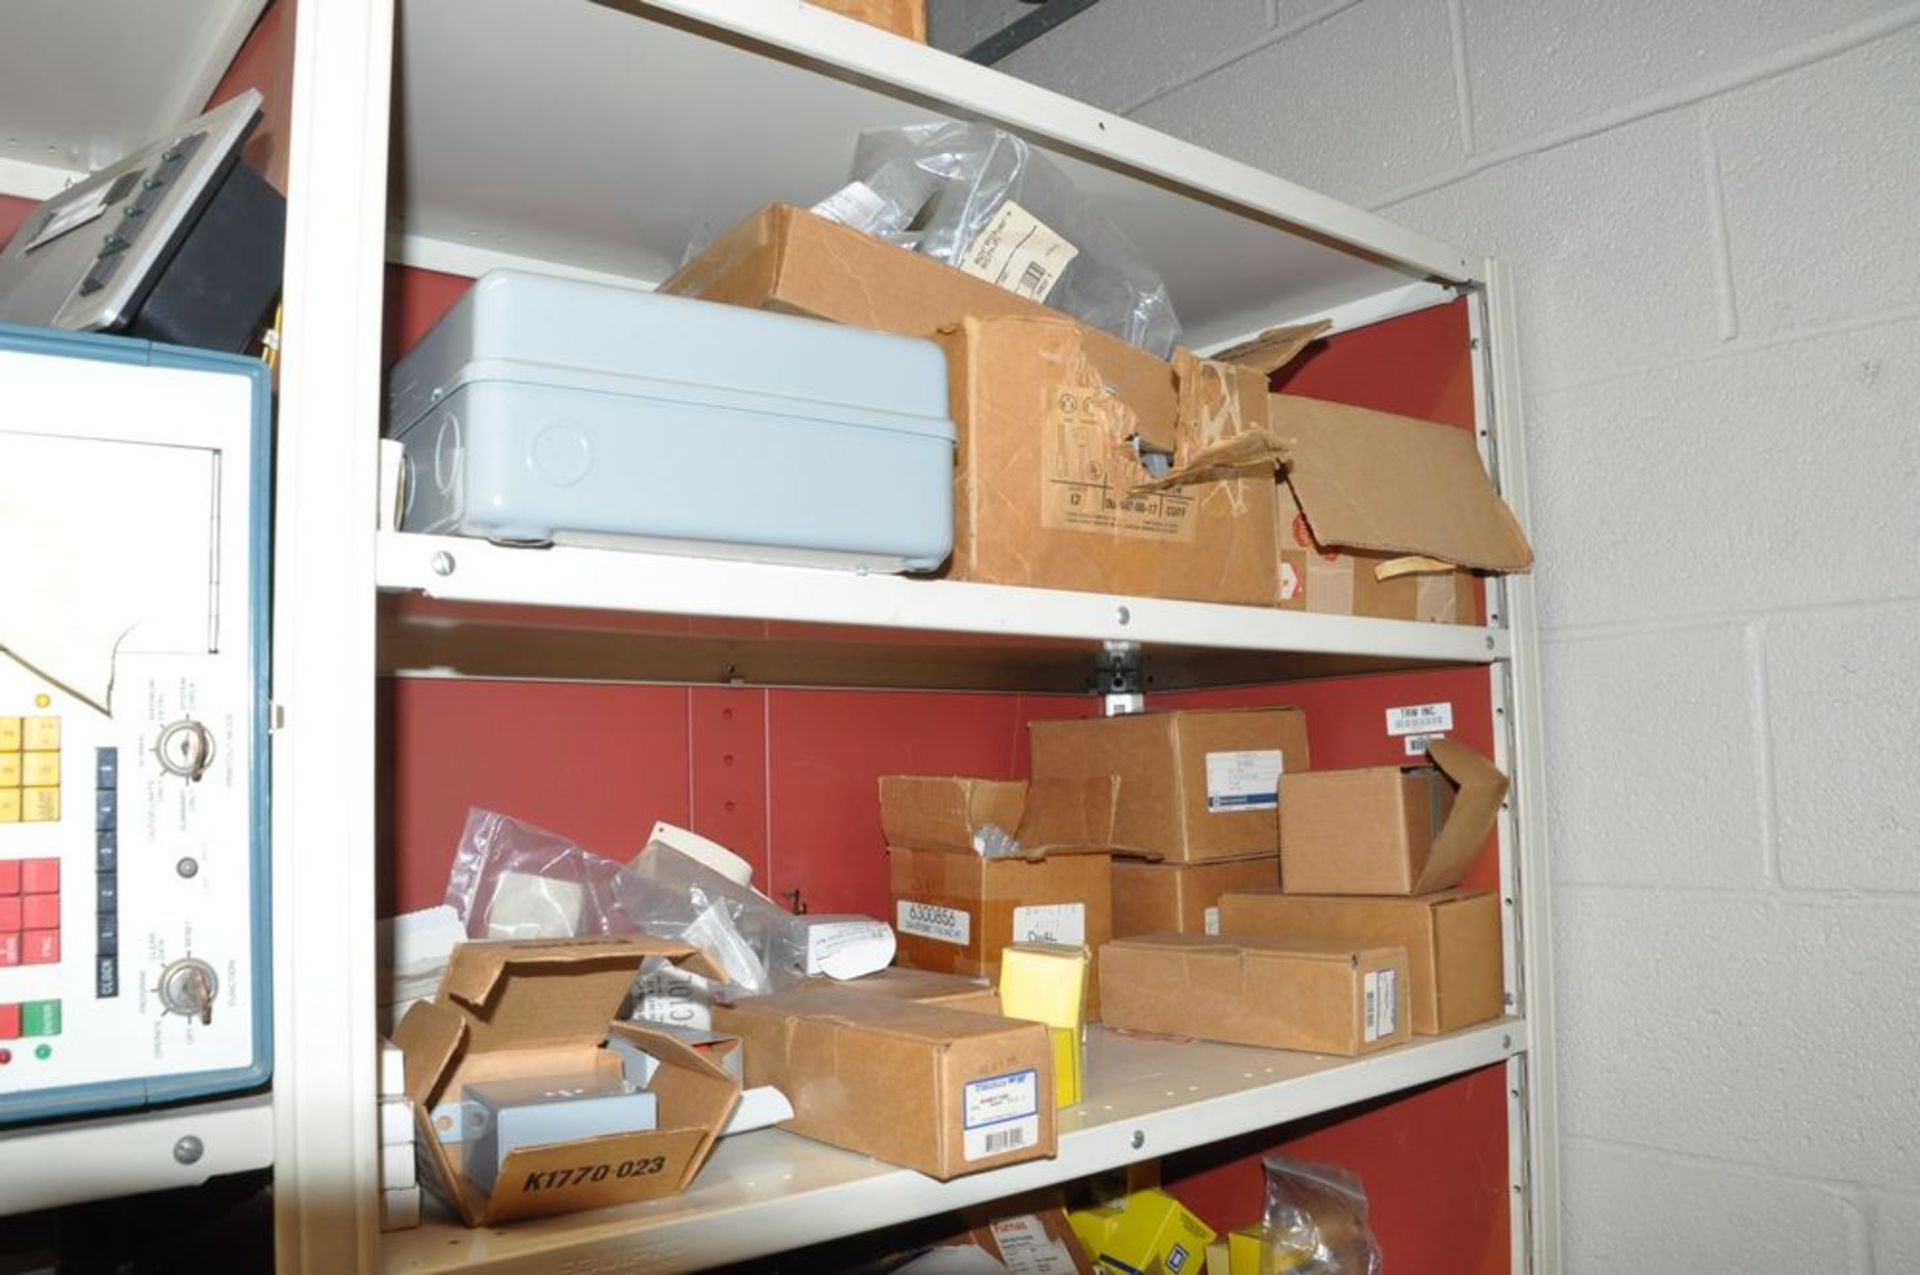 Lot-(5) Sections Shelving with General Maintenance Contents in (1) Group, (Maintenance Shop- - Image 10 of 11